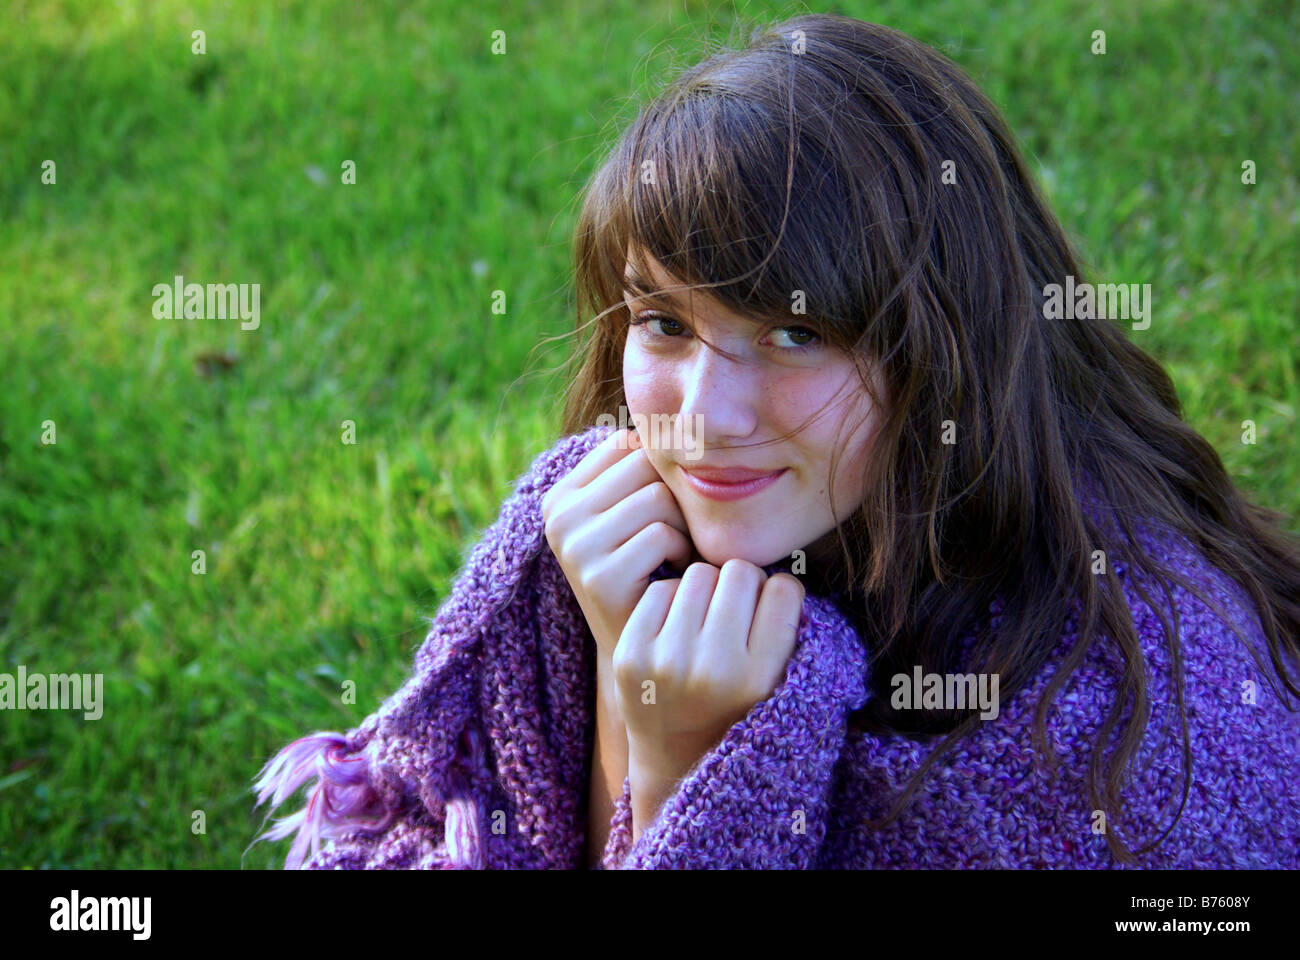 A beautiful fourteen year old girl sits on the grass warpped in a purple handknit shawl. Stock Photo